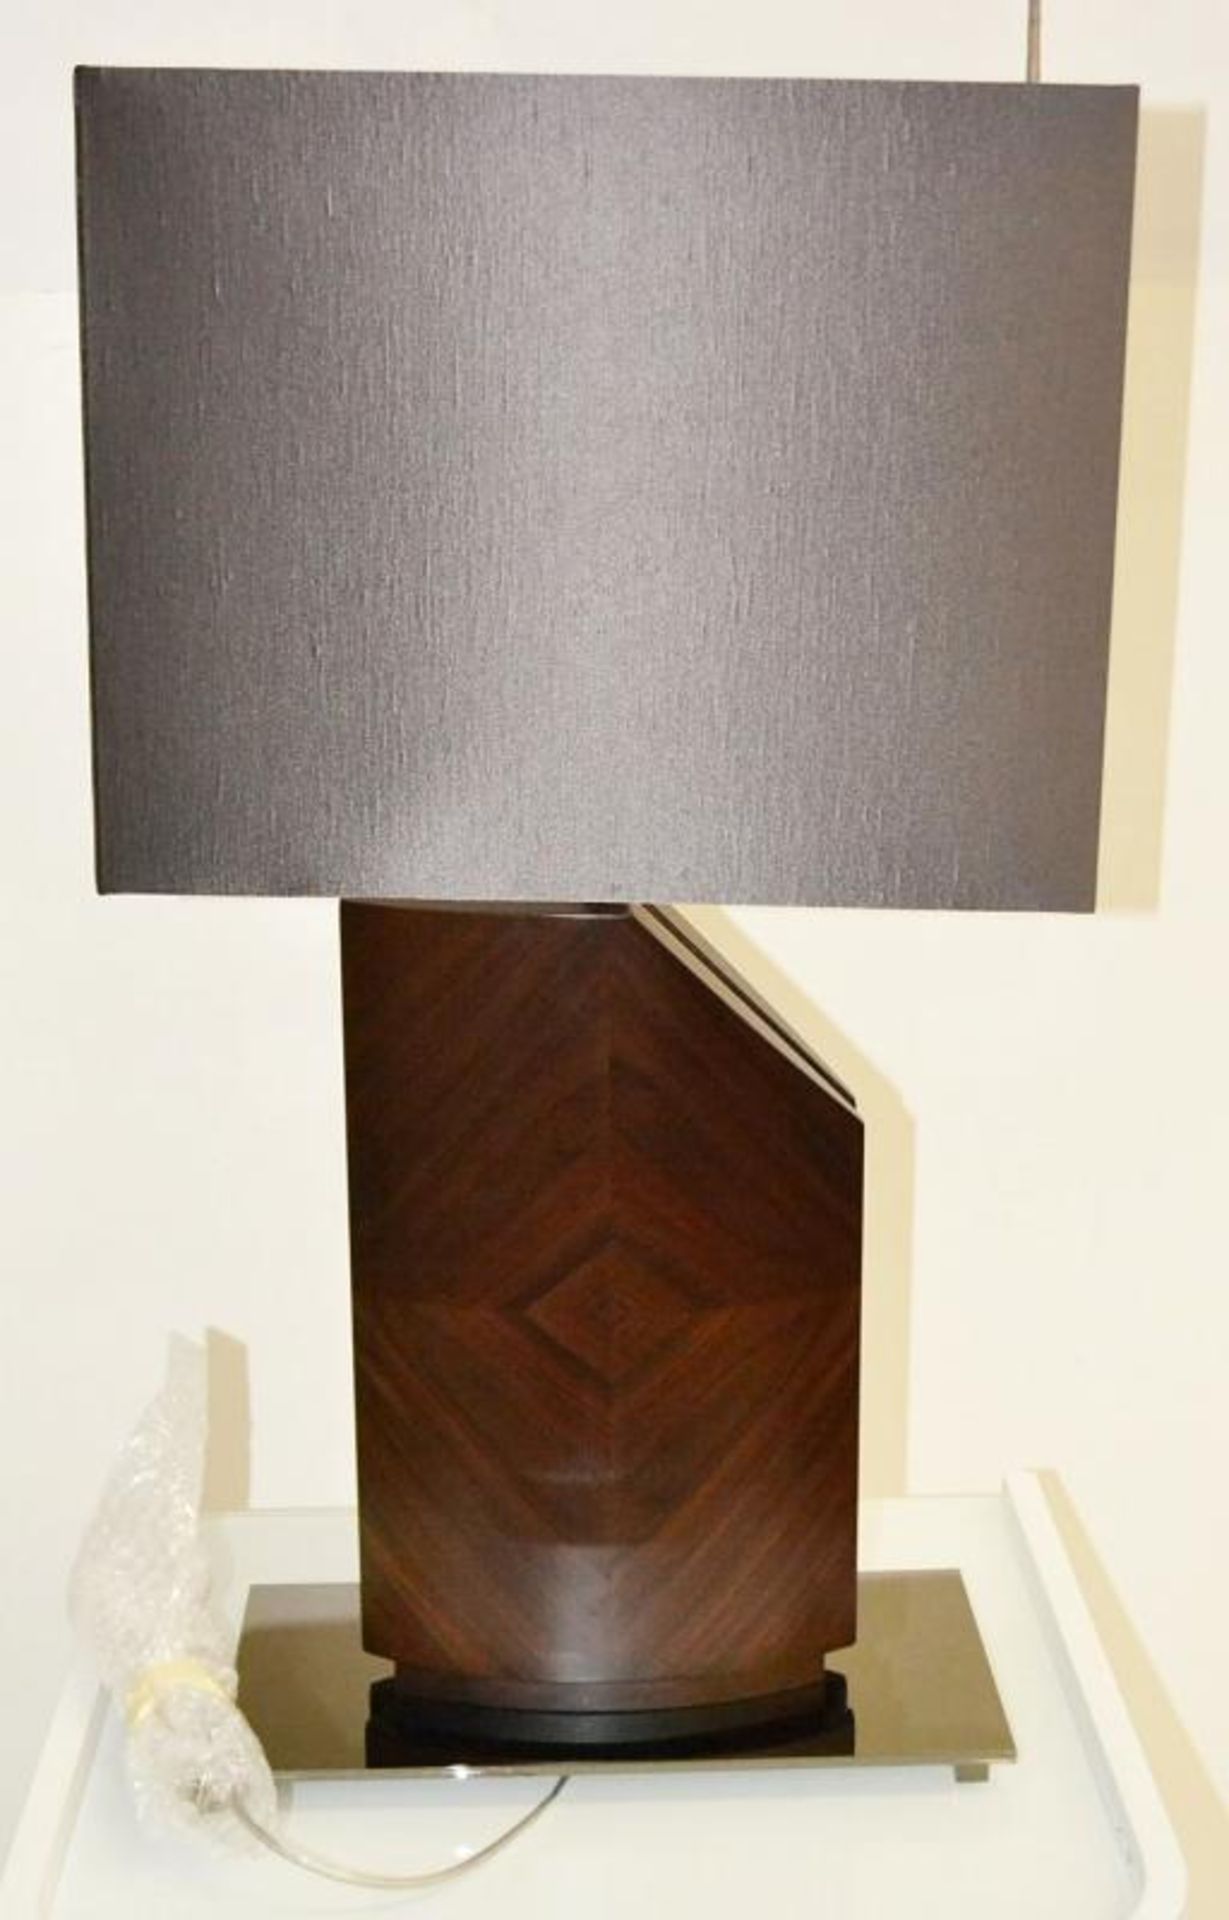 1 x SMANIA 'Wi' Italian Luxury Wooden Table Lamp - Ref: 6078342 P2/19 - CL087 - Location: Altrincham - Image 10 of 10